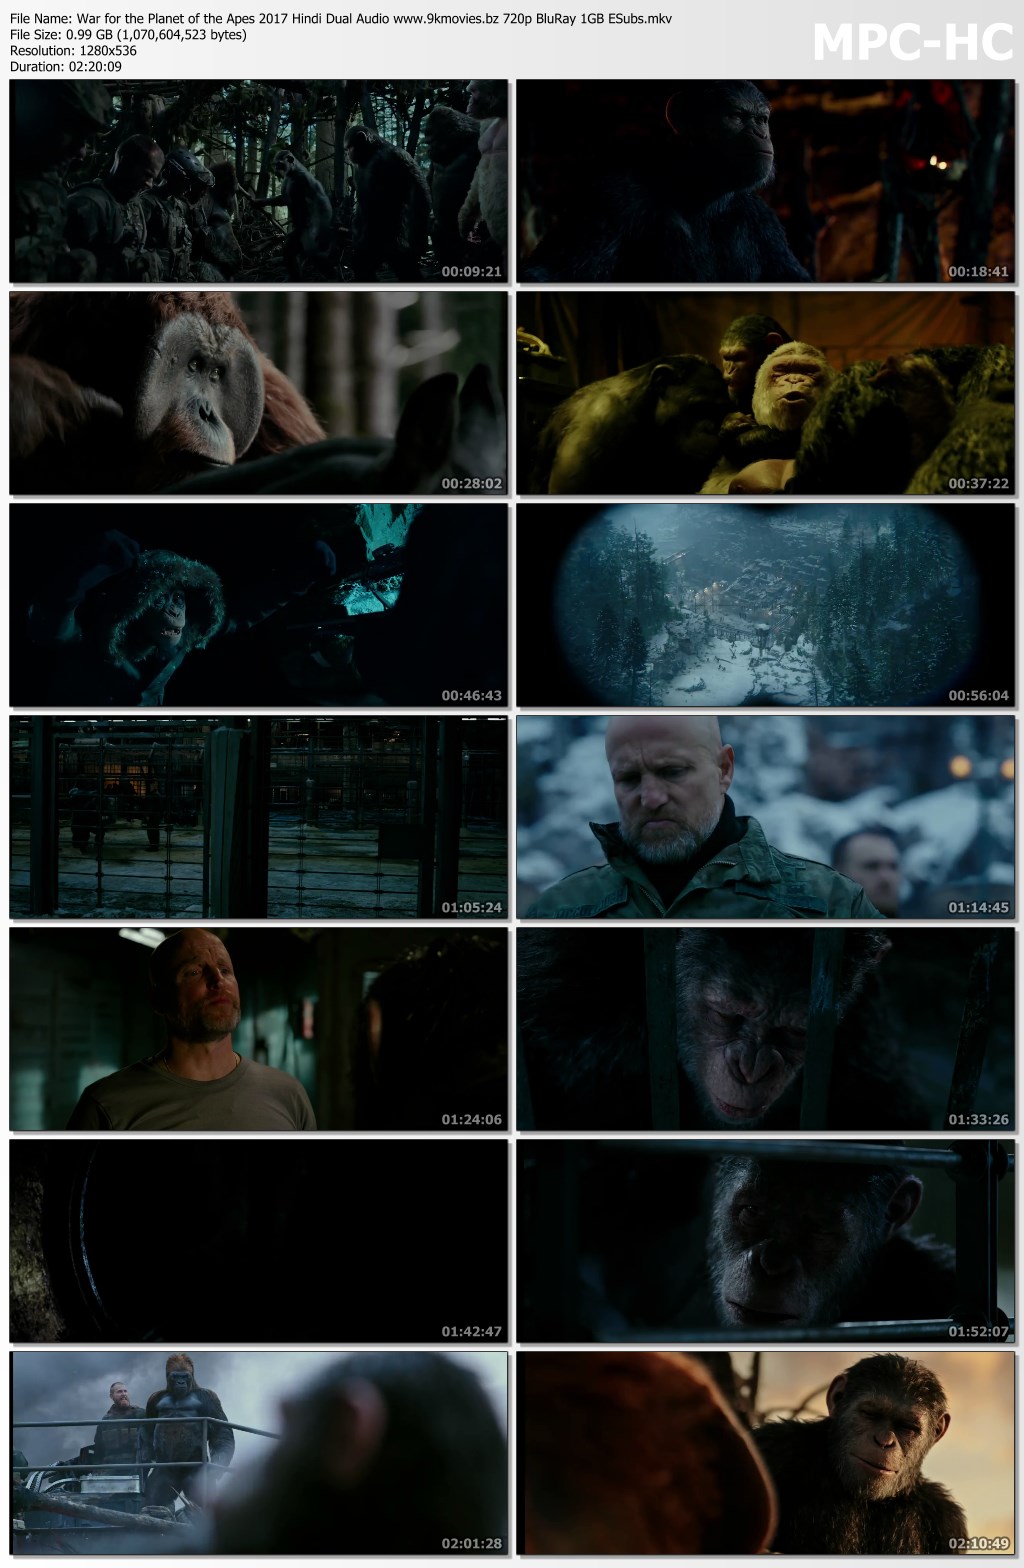 dawn of the planet of the apes 2017 dual audio 720p